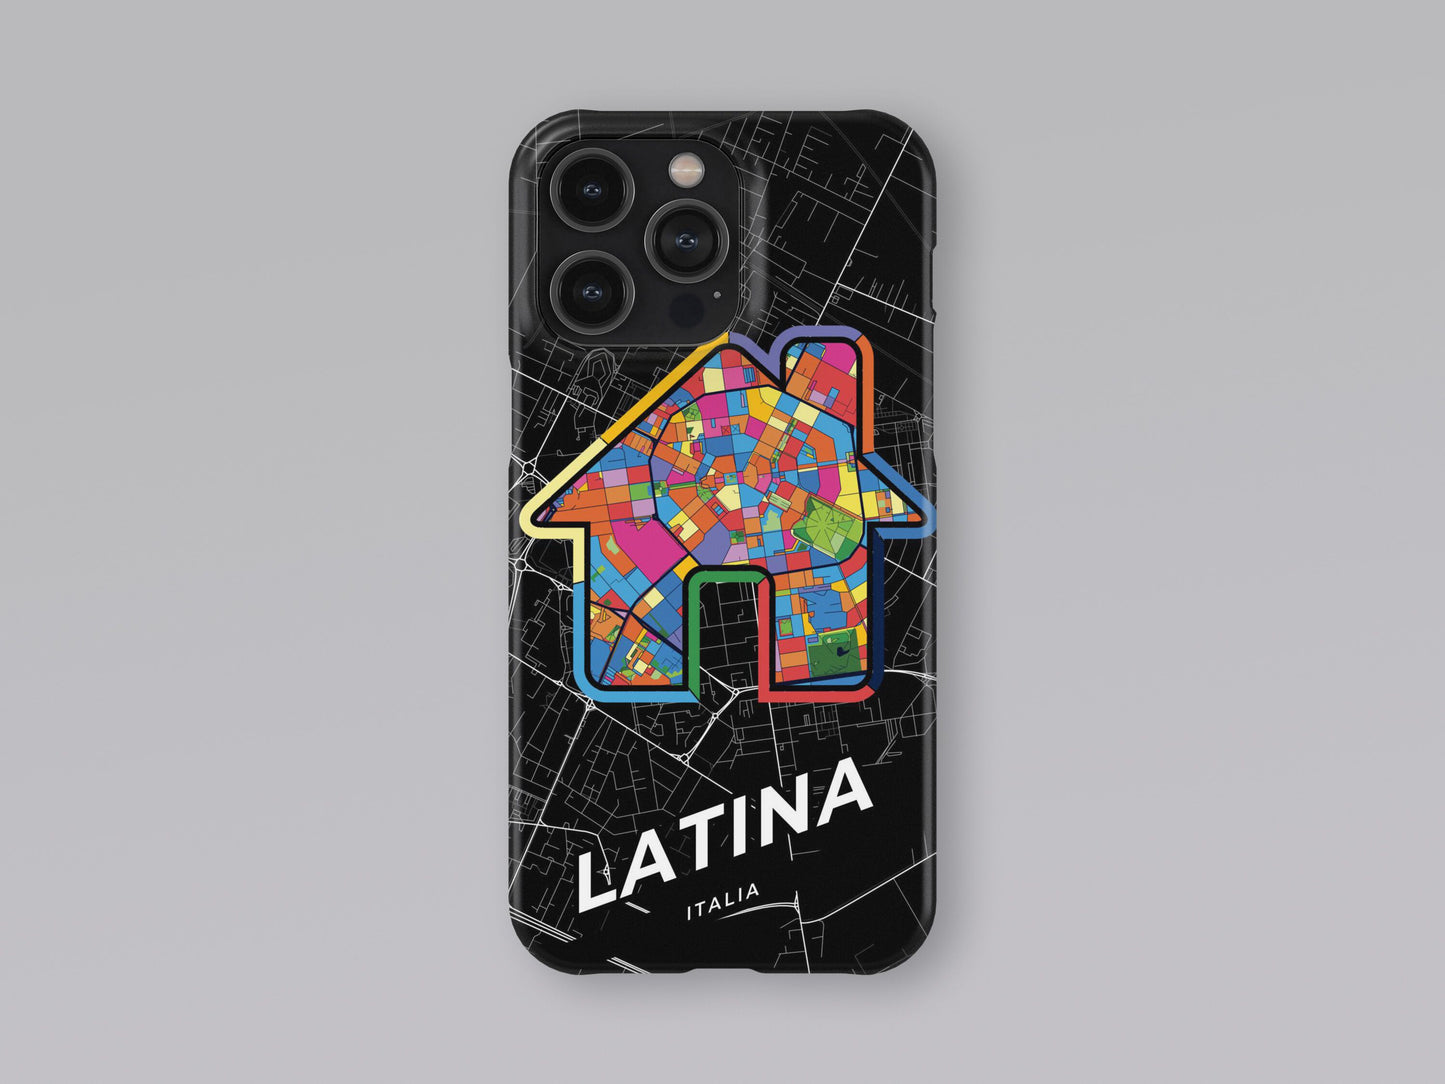 Latina Italy slim phone case with colorful icon. Birthday, wedding or housewarming gift. Couple match cases. 3